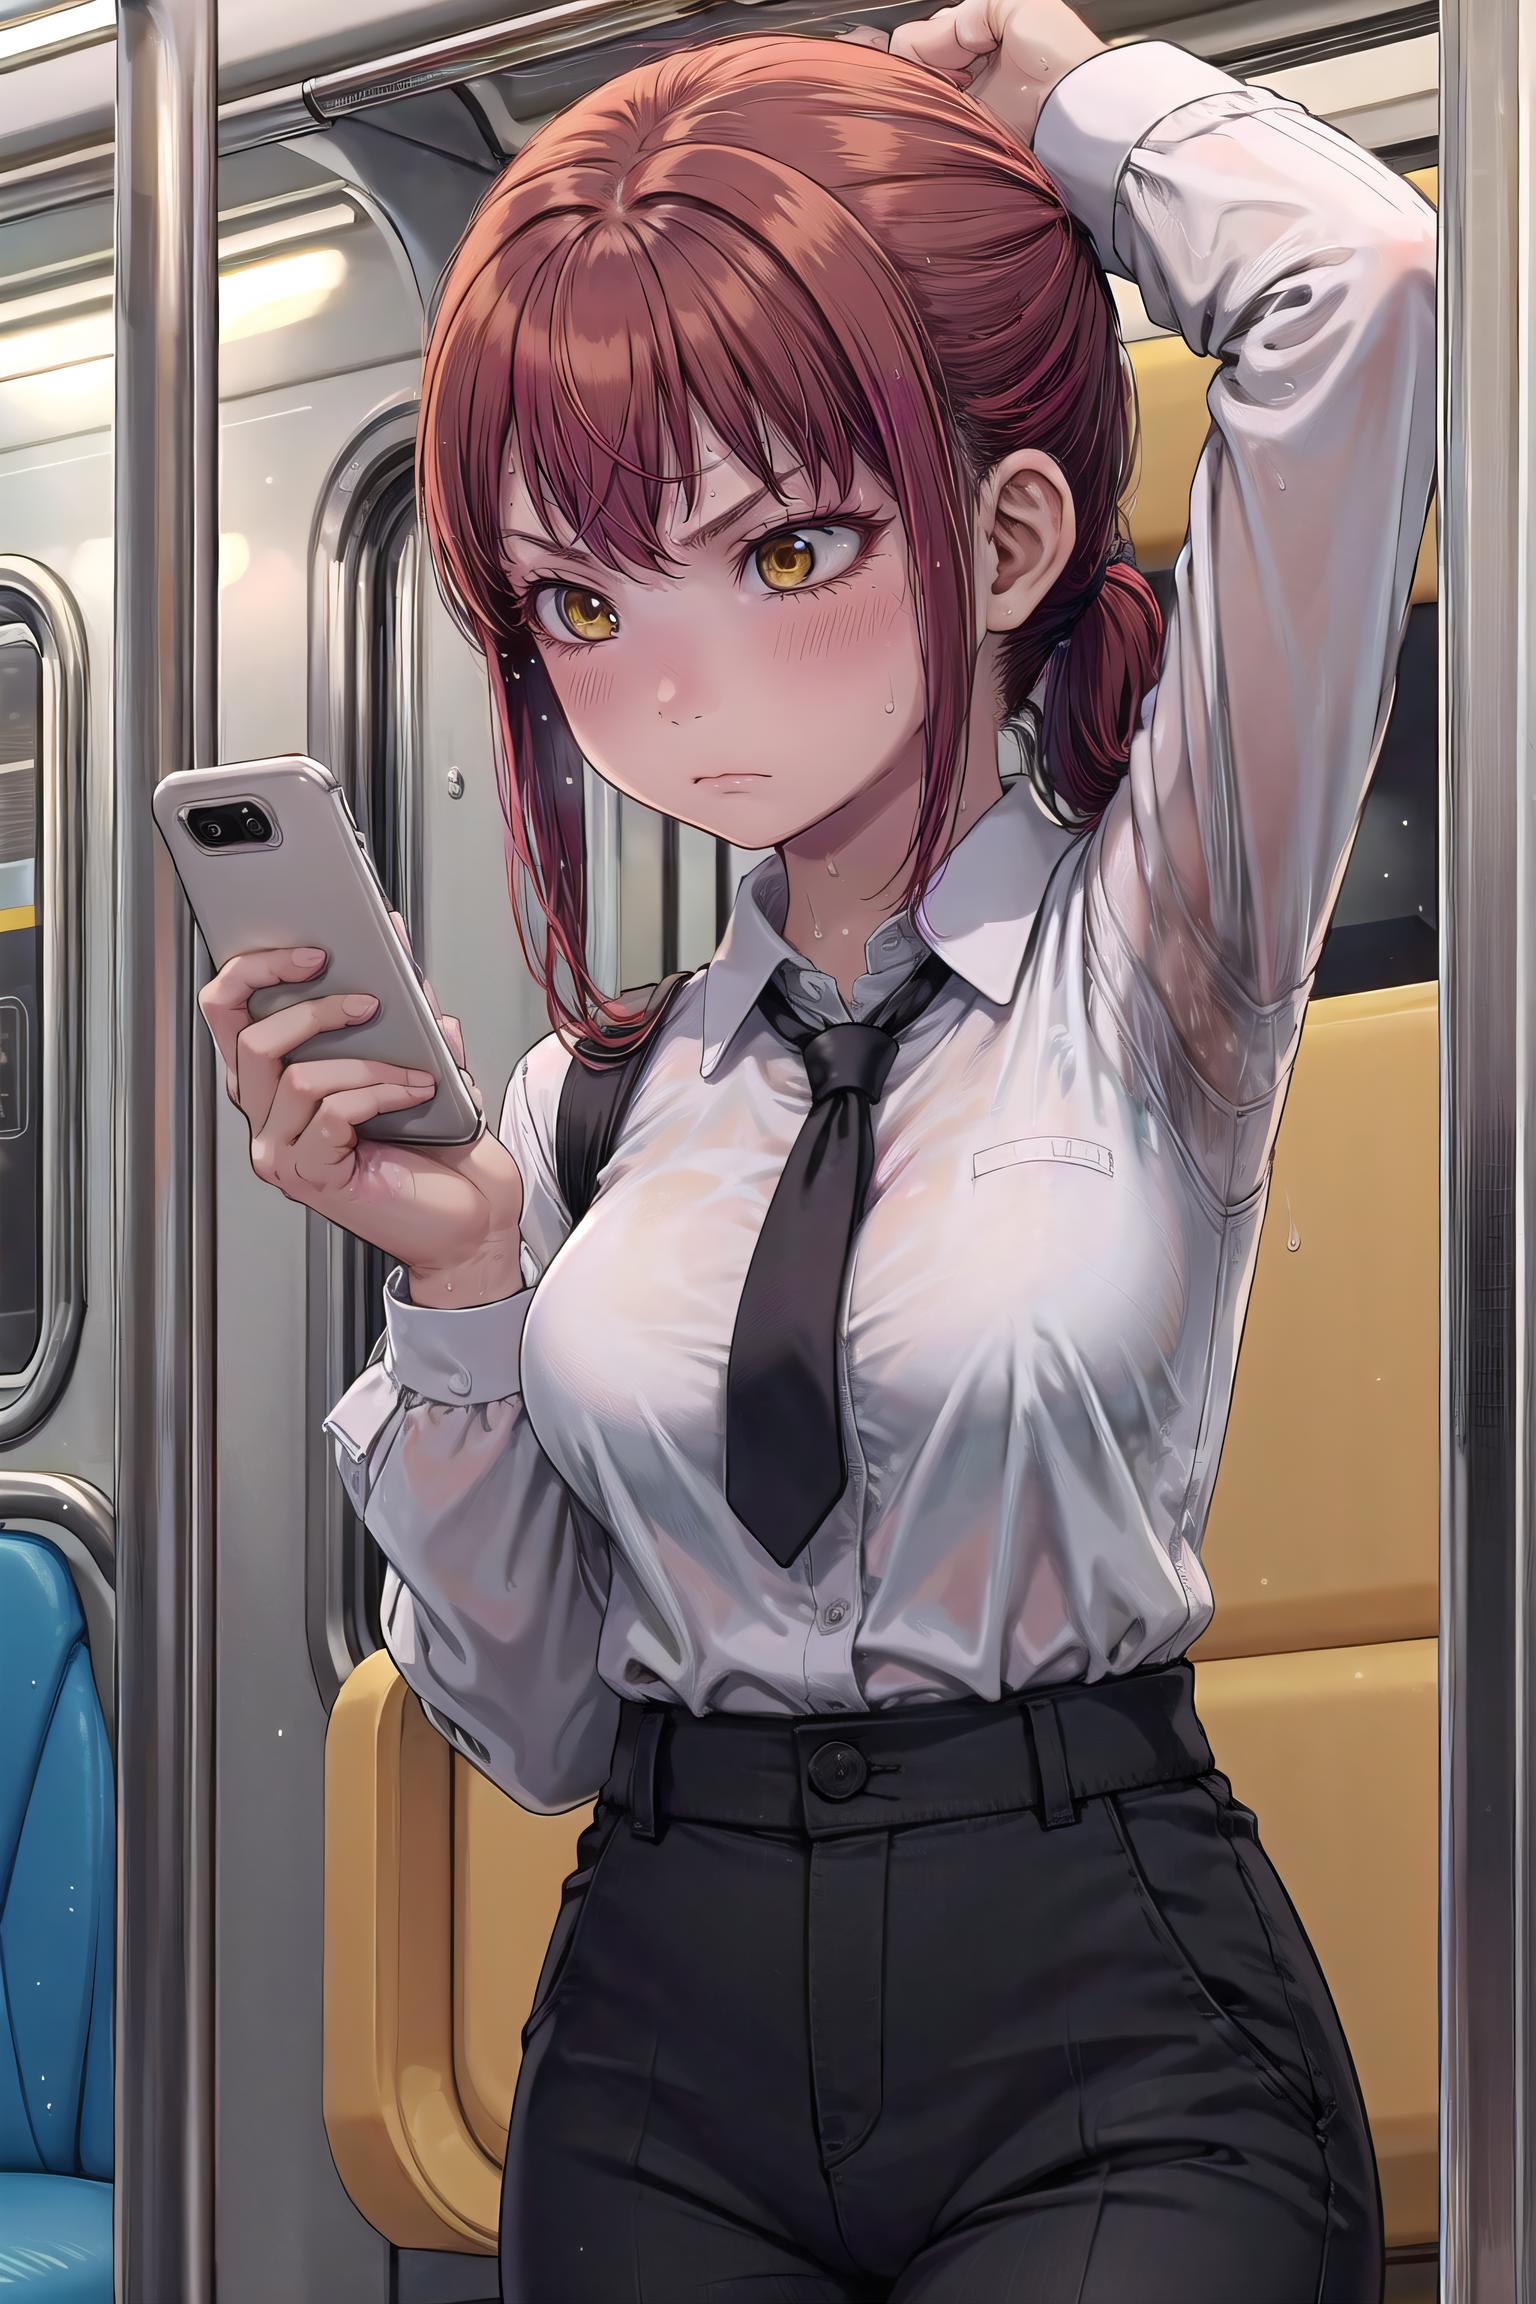 Angry Anime Woman Wearing a Tie and Holding a Cell Phone.